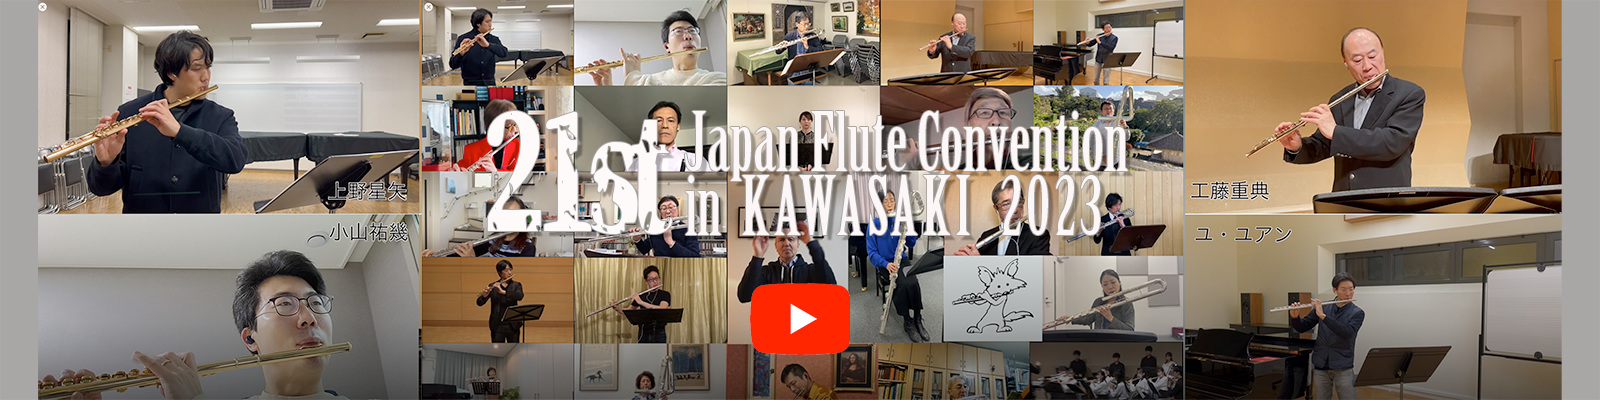 21st Flute Convention in KAWASAKI 2023 PV